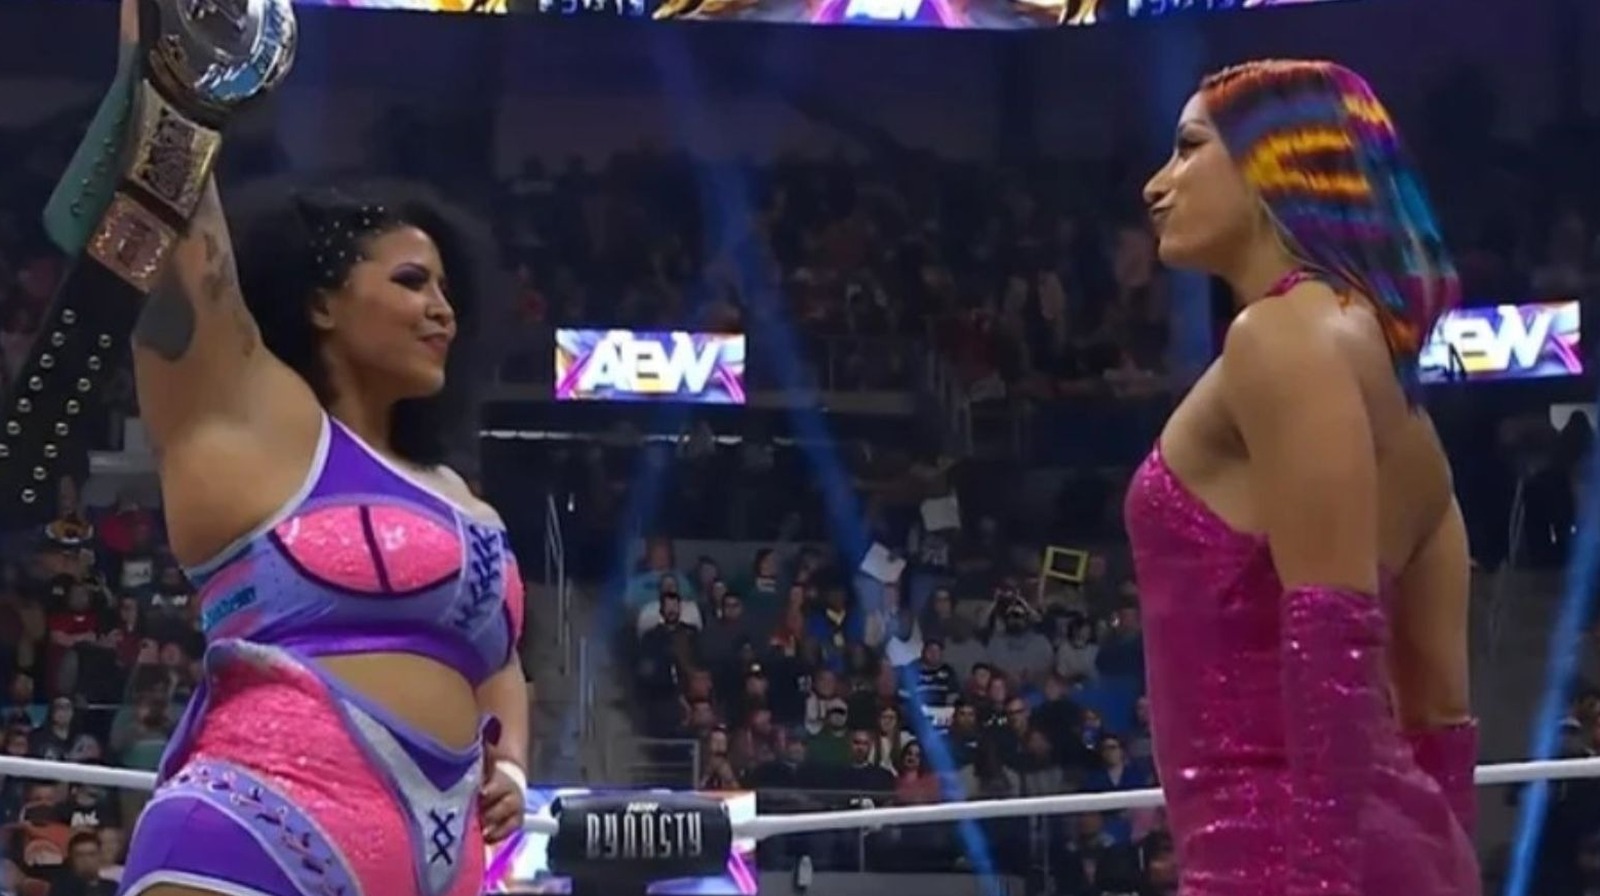 Willow Nightingale Puts Mercedes Mone Through Table In AEW Dynamite Contract Signing